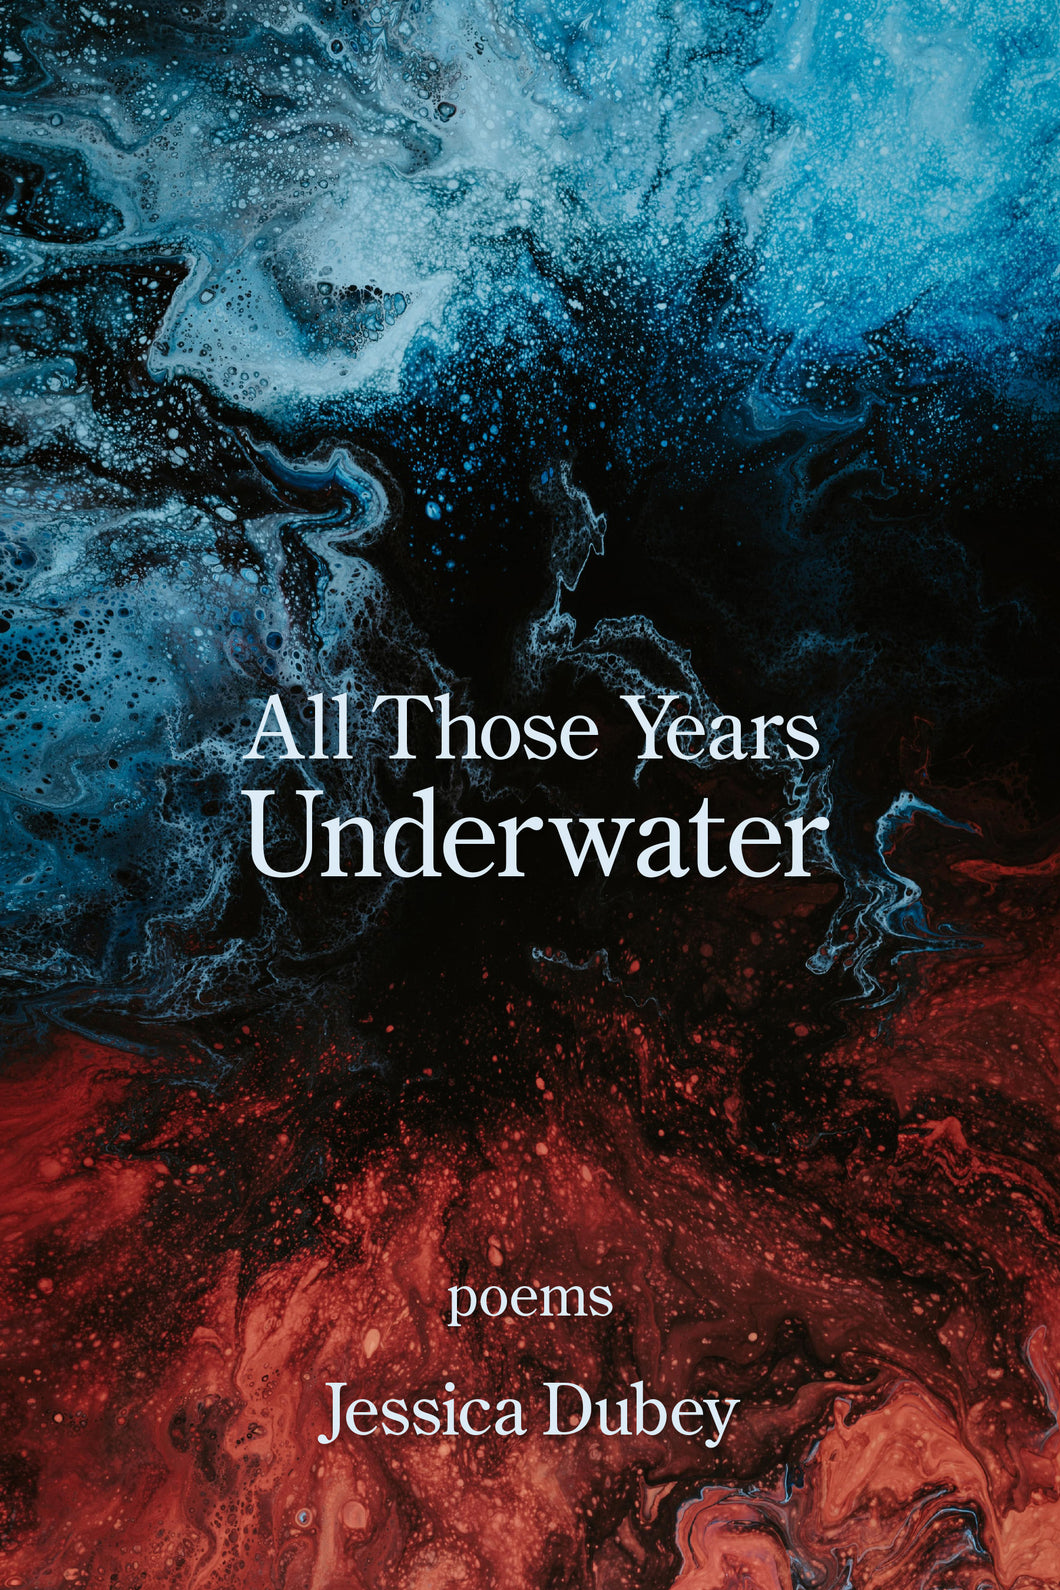 All Those Years Underwater